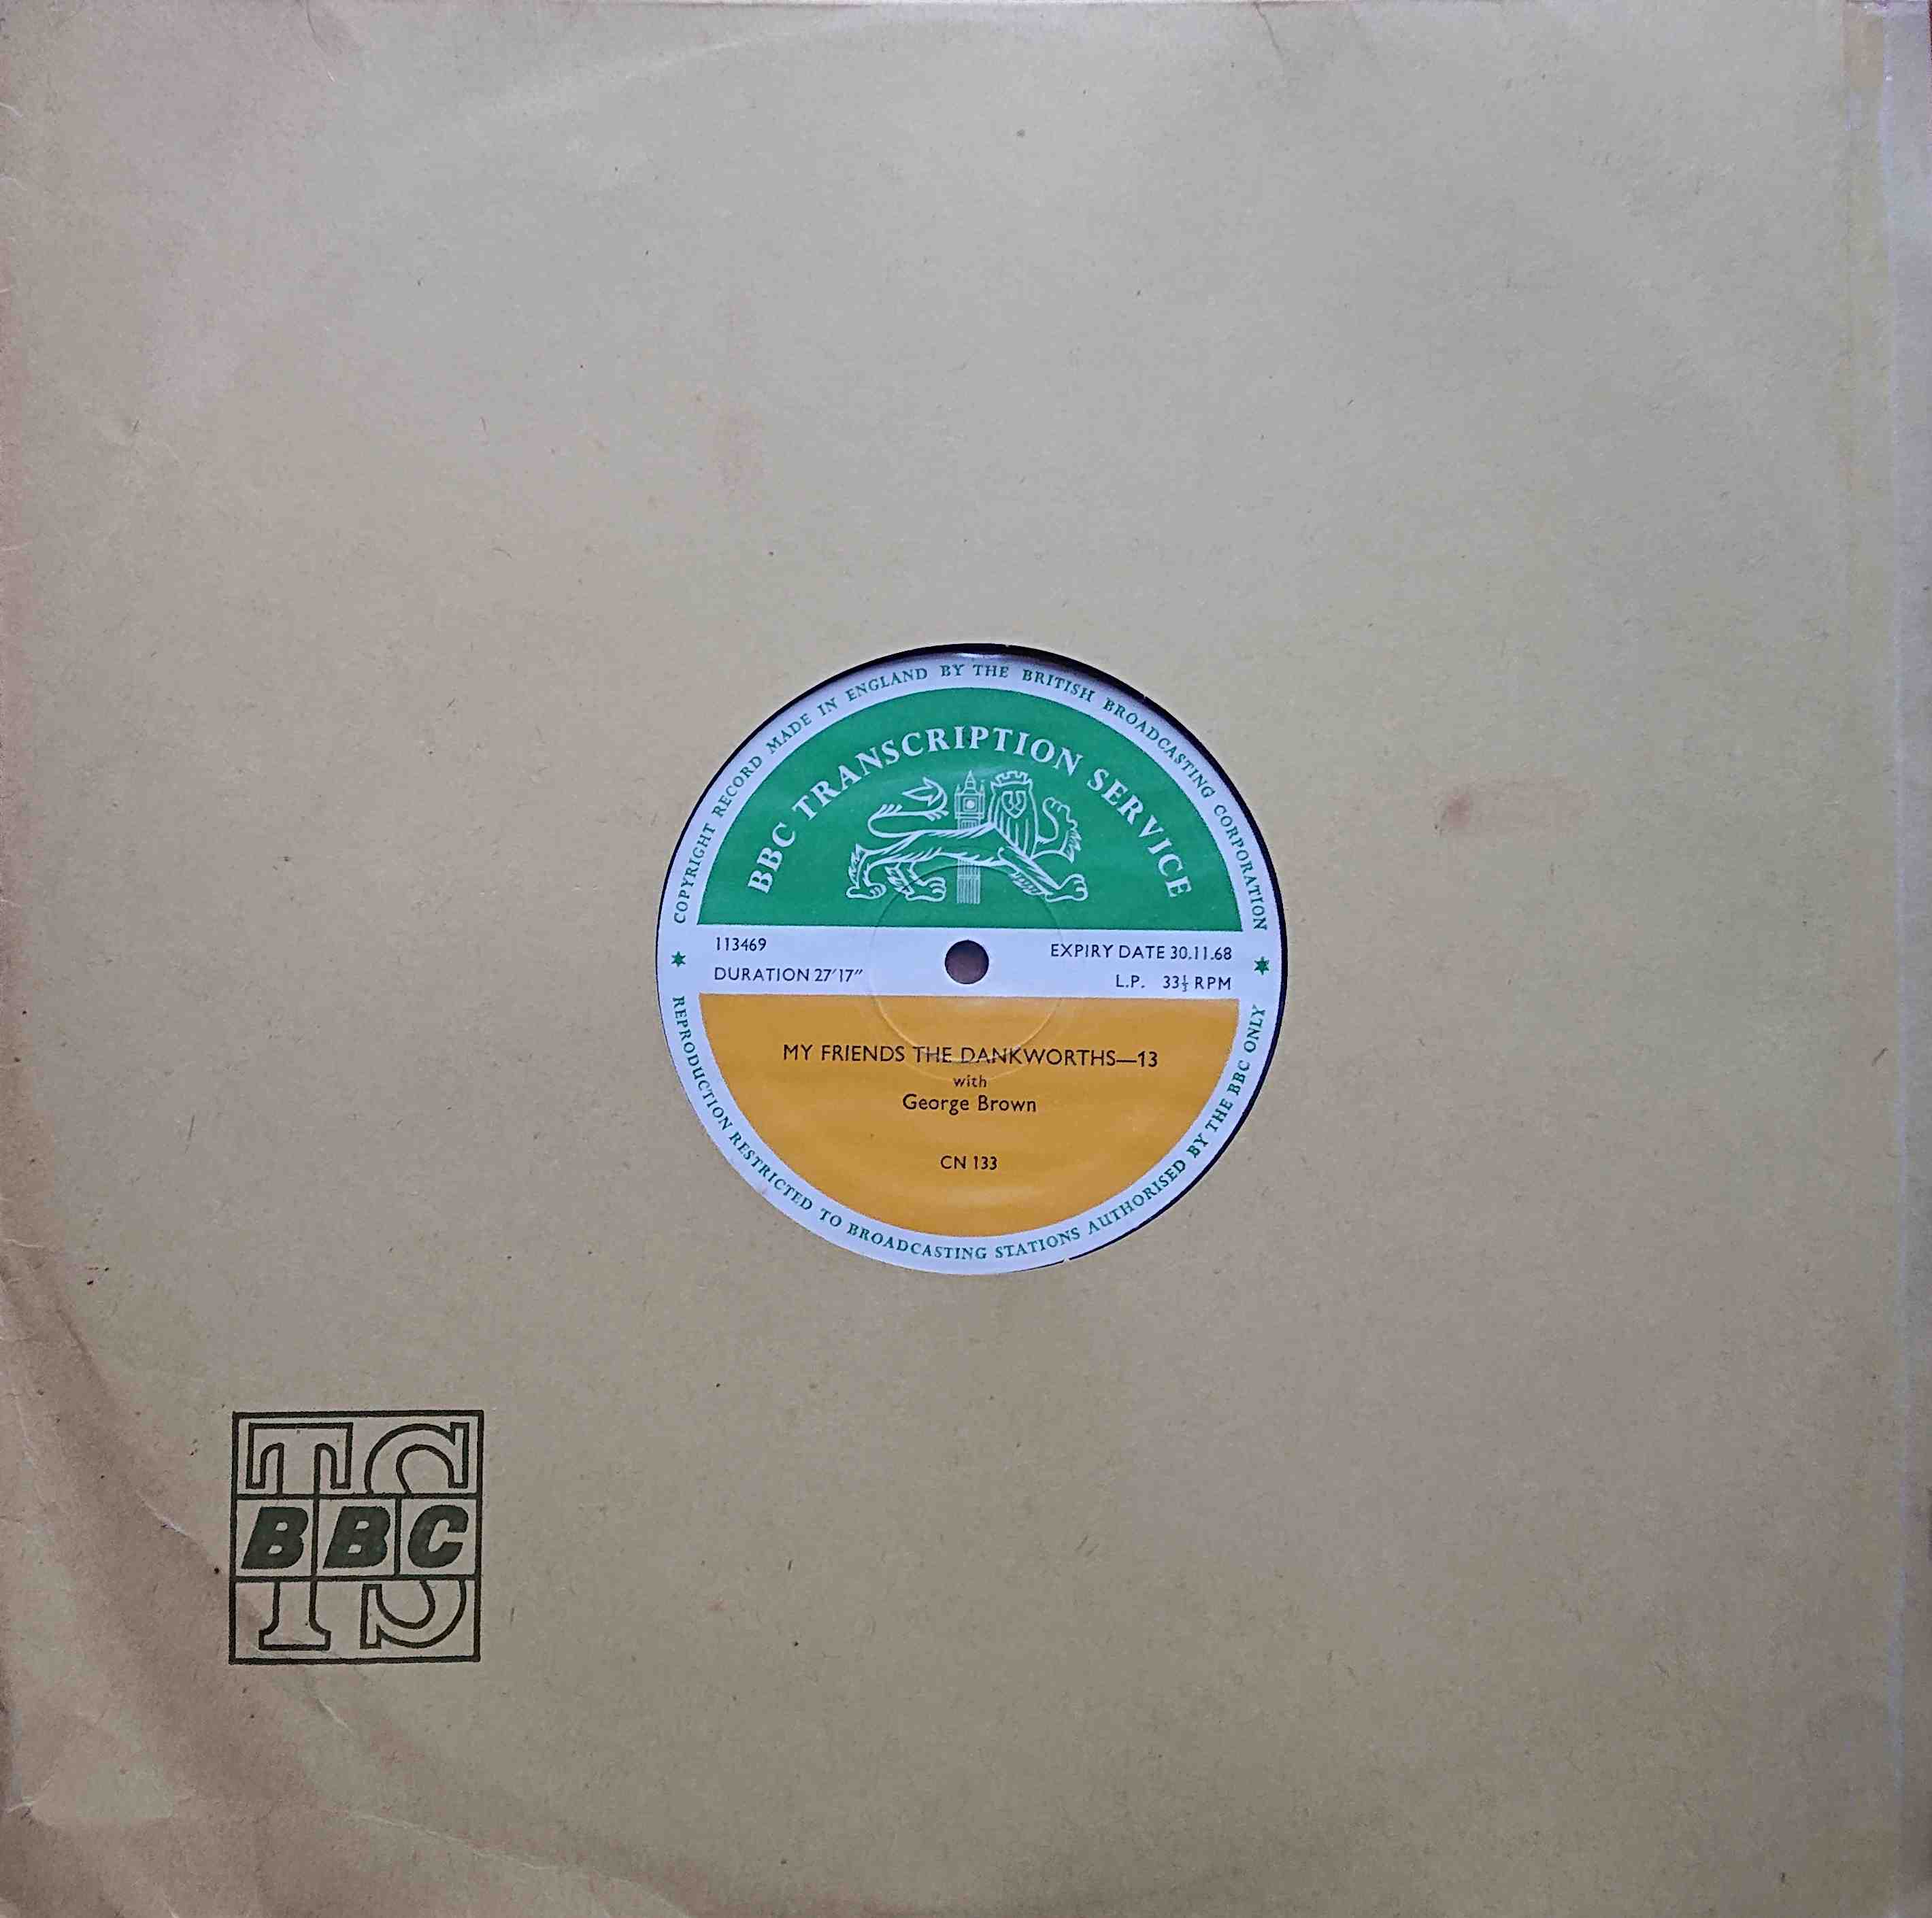 Picture of CN 133 6 My friends the Dankworths - 11 & 12 by artist Bobby Breen / Denise Damons from the BBC albums - Records and Tapes library